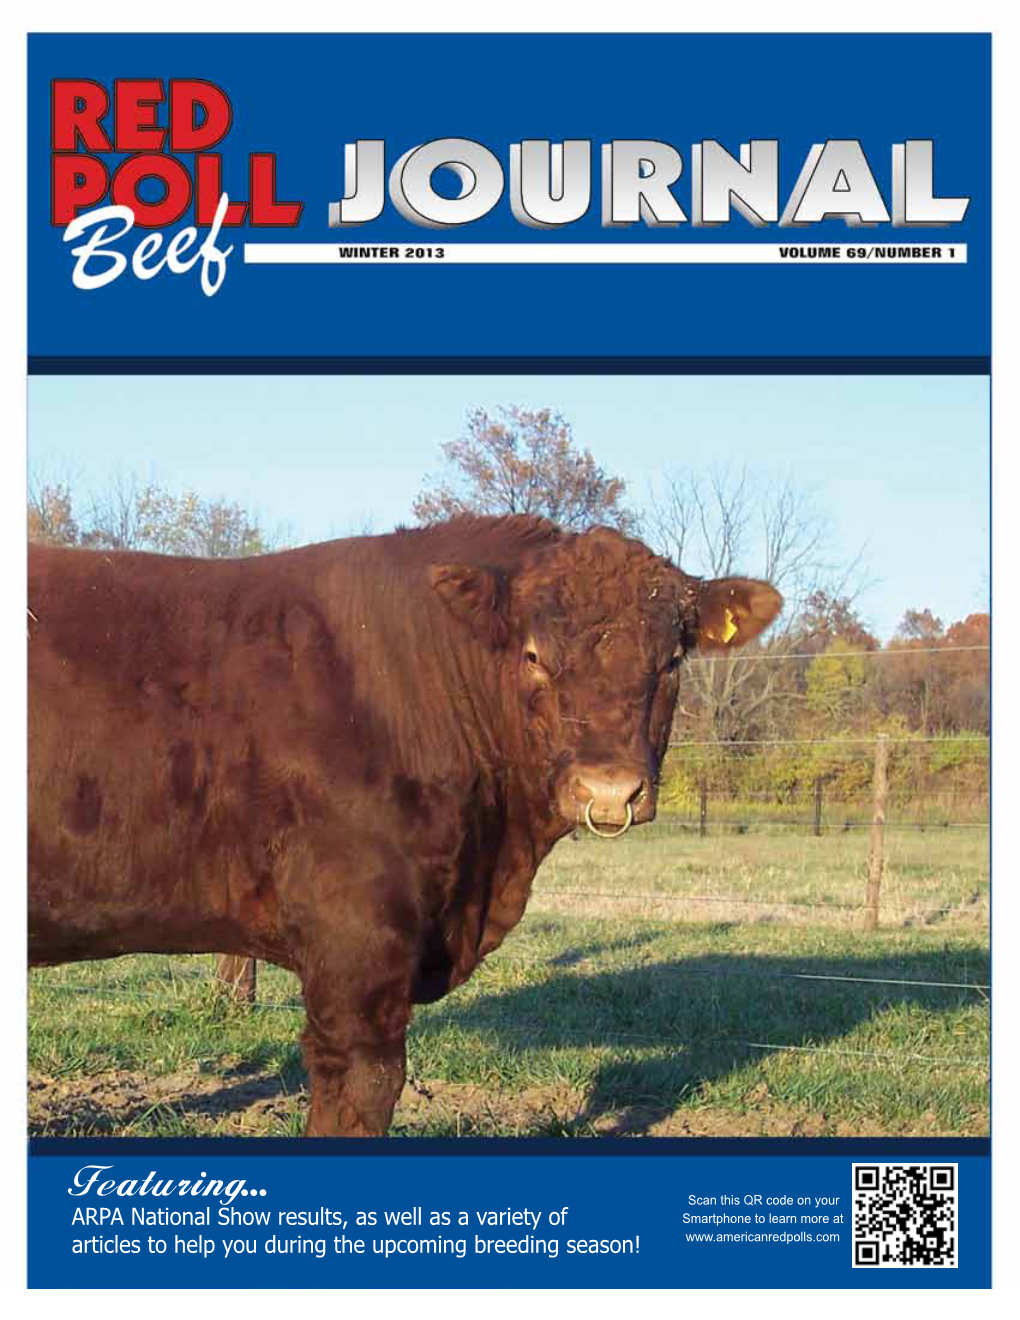 A Myostatin Variant in Red Poll Cattle